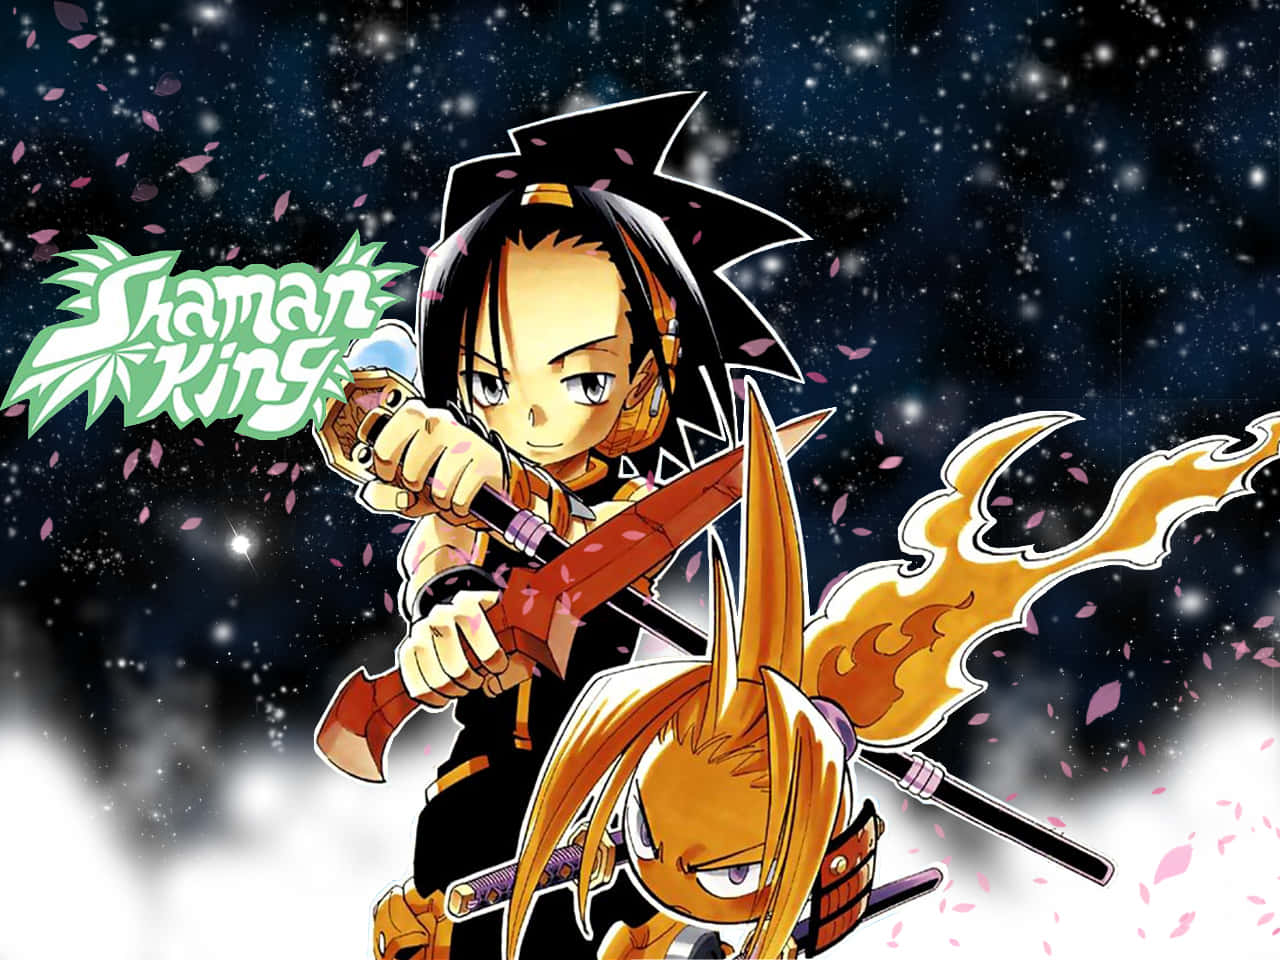 Shaman King  What spirit do you connect with  one of my favorite anime   PeakD